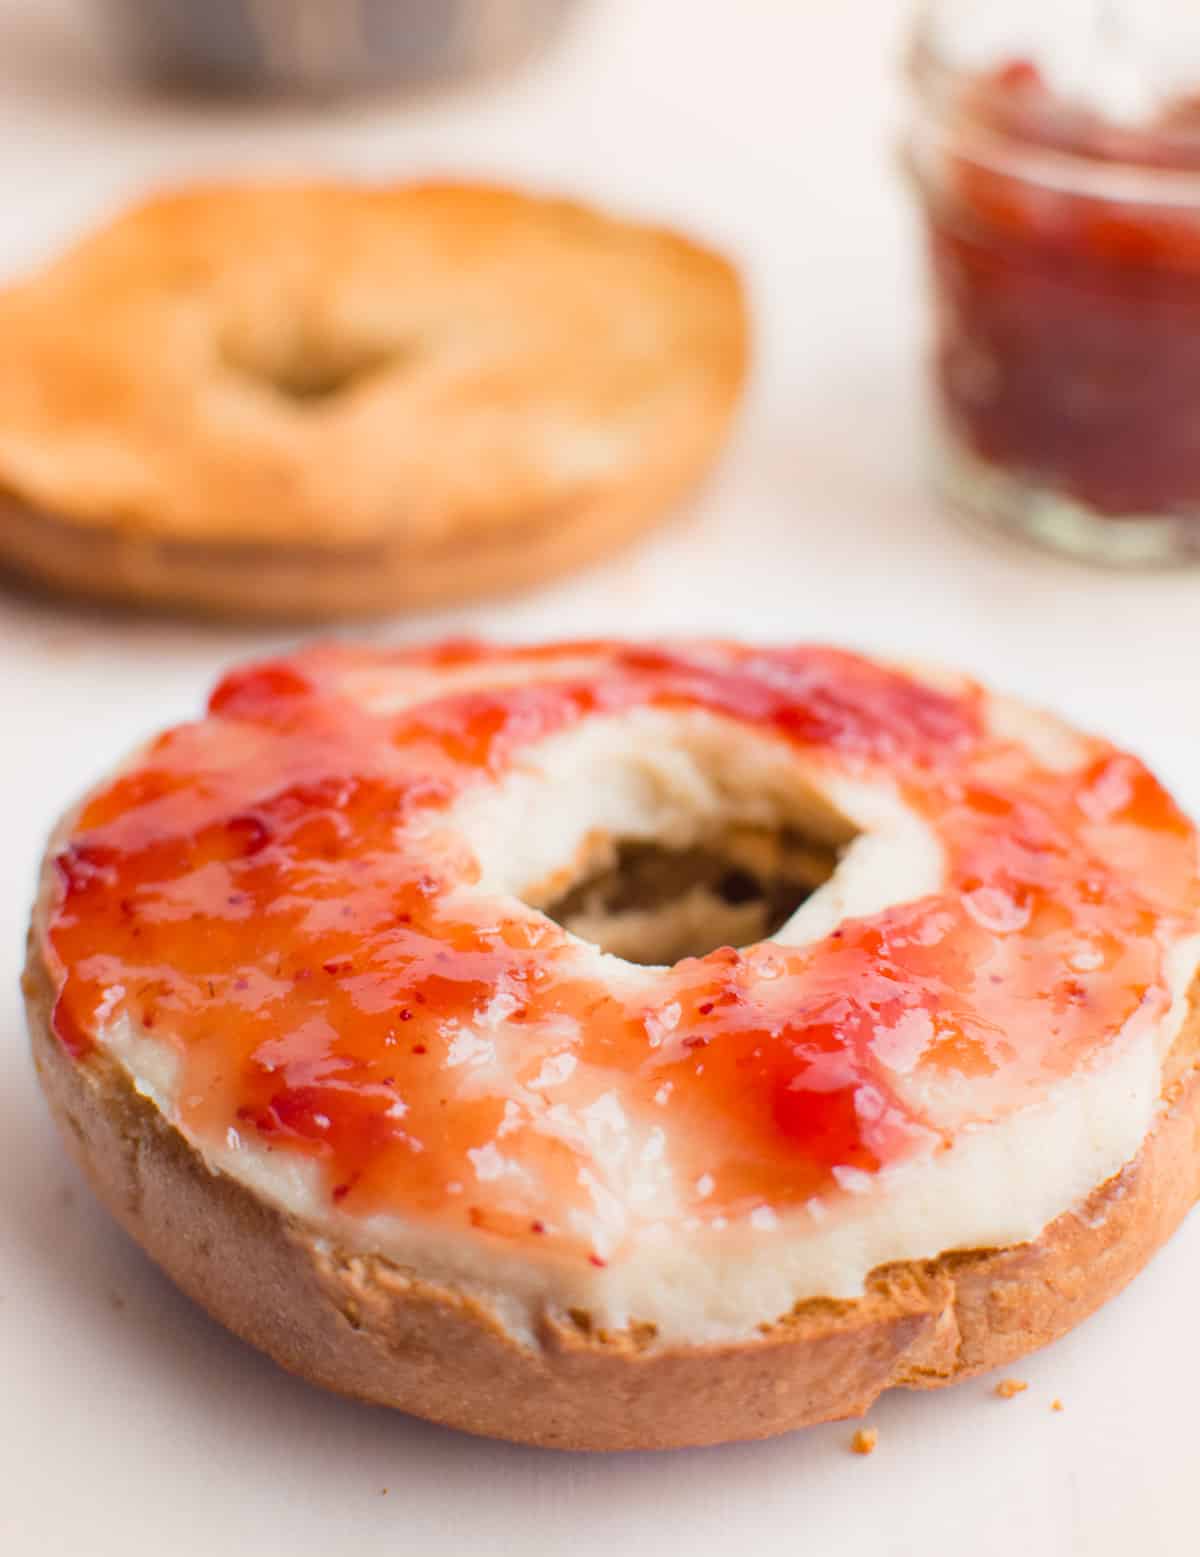 A toasted bagel spread with cashew cream cheese and strawberry preserves.